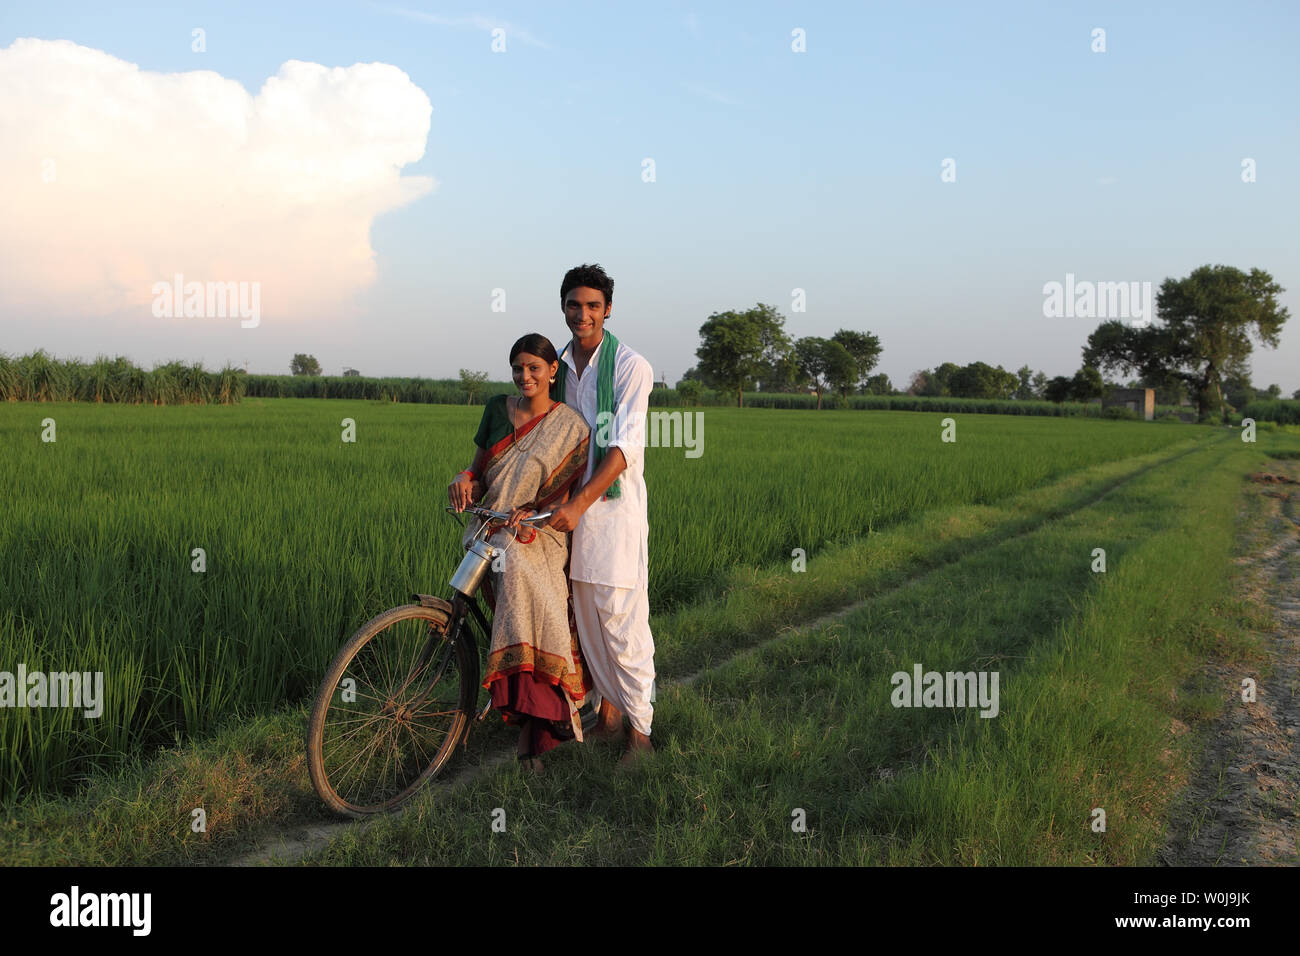 Rural couple riding on a bicycle in the field Stock Photo